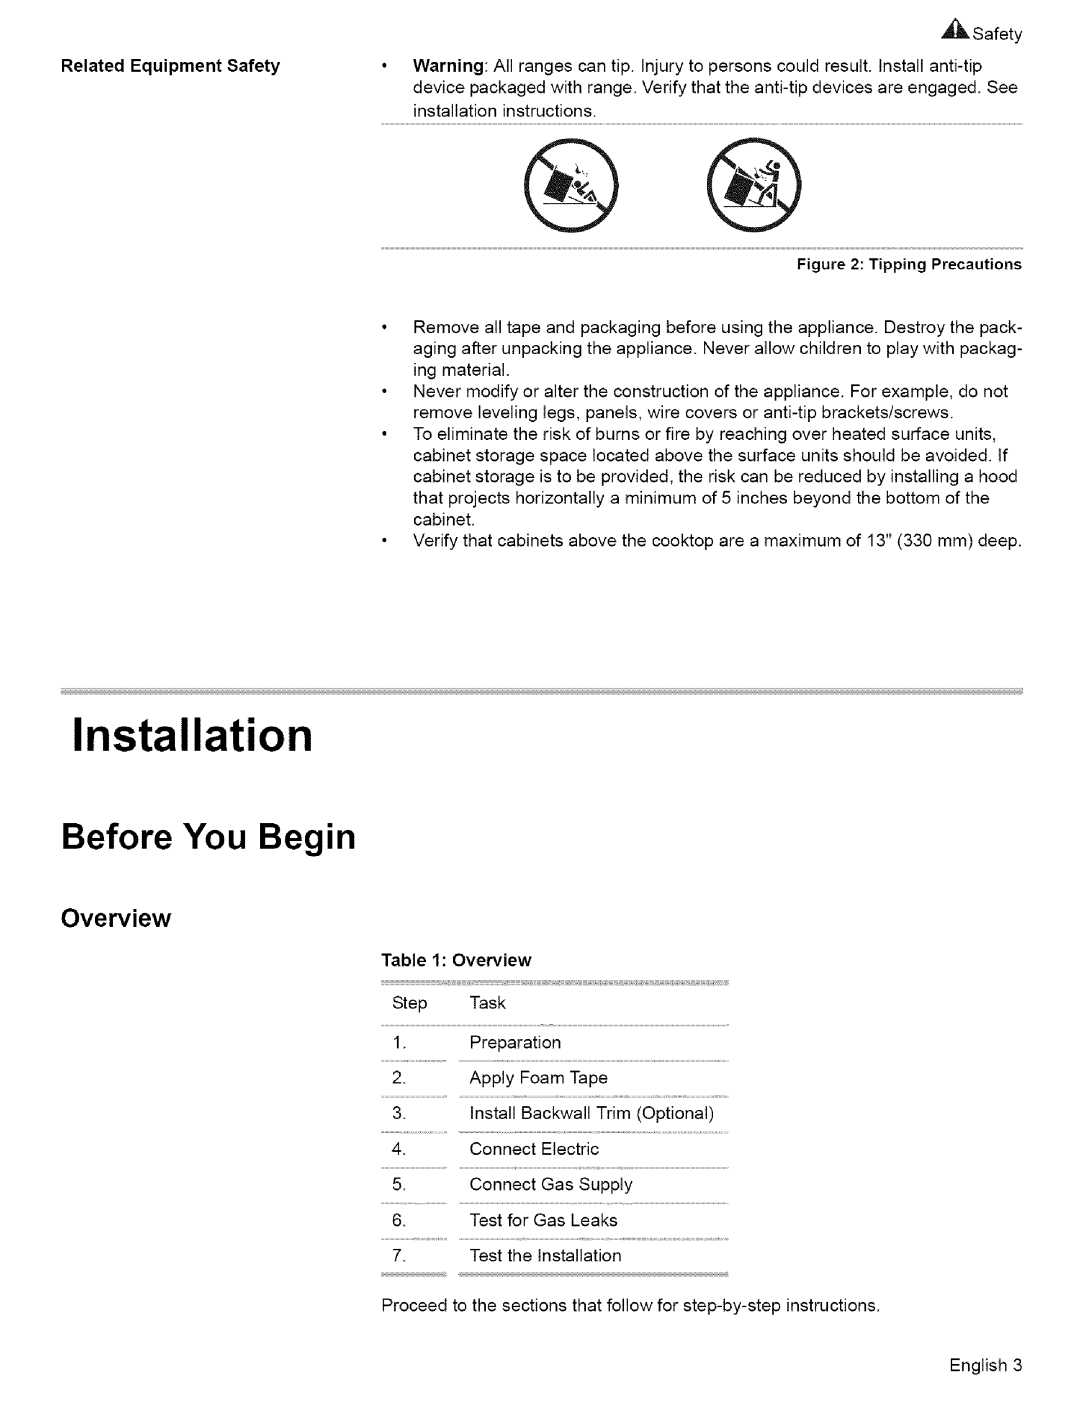 Bosch Appliances L0609466 manual Installation, Before You Begin, Overview, Tipping Precautions 